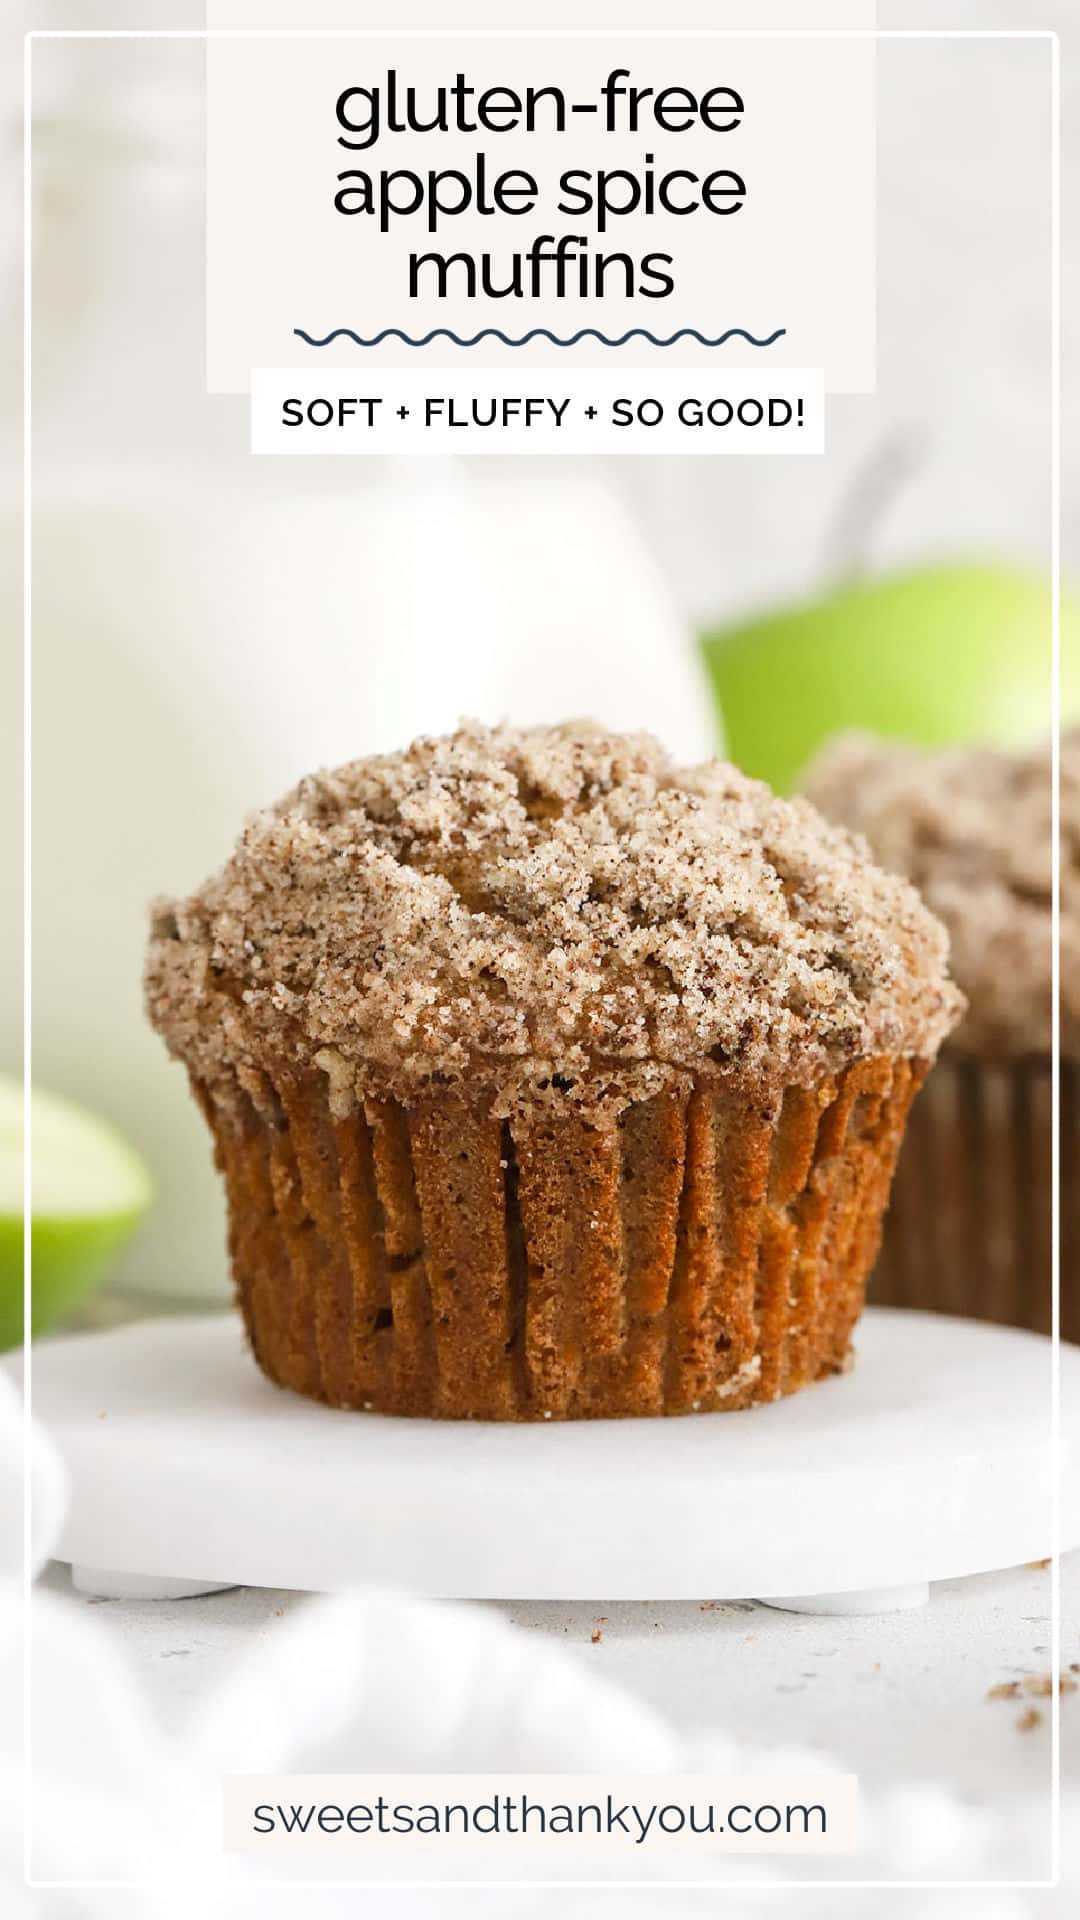 This easy gluten-free applesauce muffins recipe is made from simple ingredients & warm spices. You'll love the soft, fluffy texture! / gluten free apple muffins / gluten free muffins with applesauce / gluten free apple spice muffins / gluten free apple cinnamon muffins / gluten free apple muffin recipe / gluten free fall muffins / gluten free muffins recipe / gluten free breakfast for fall /